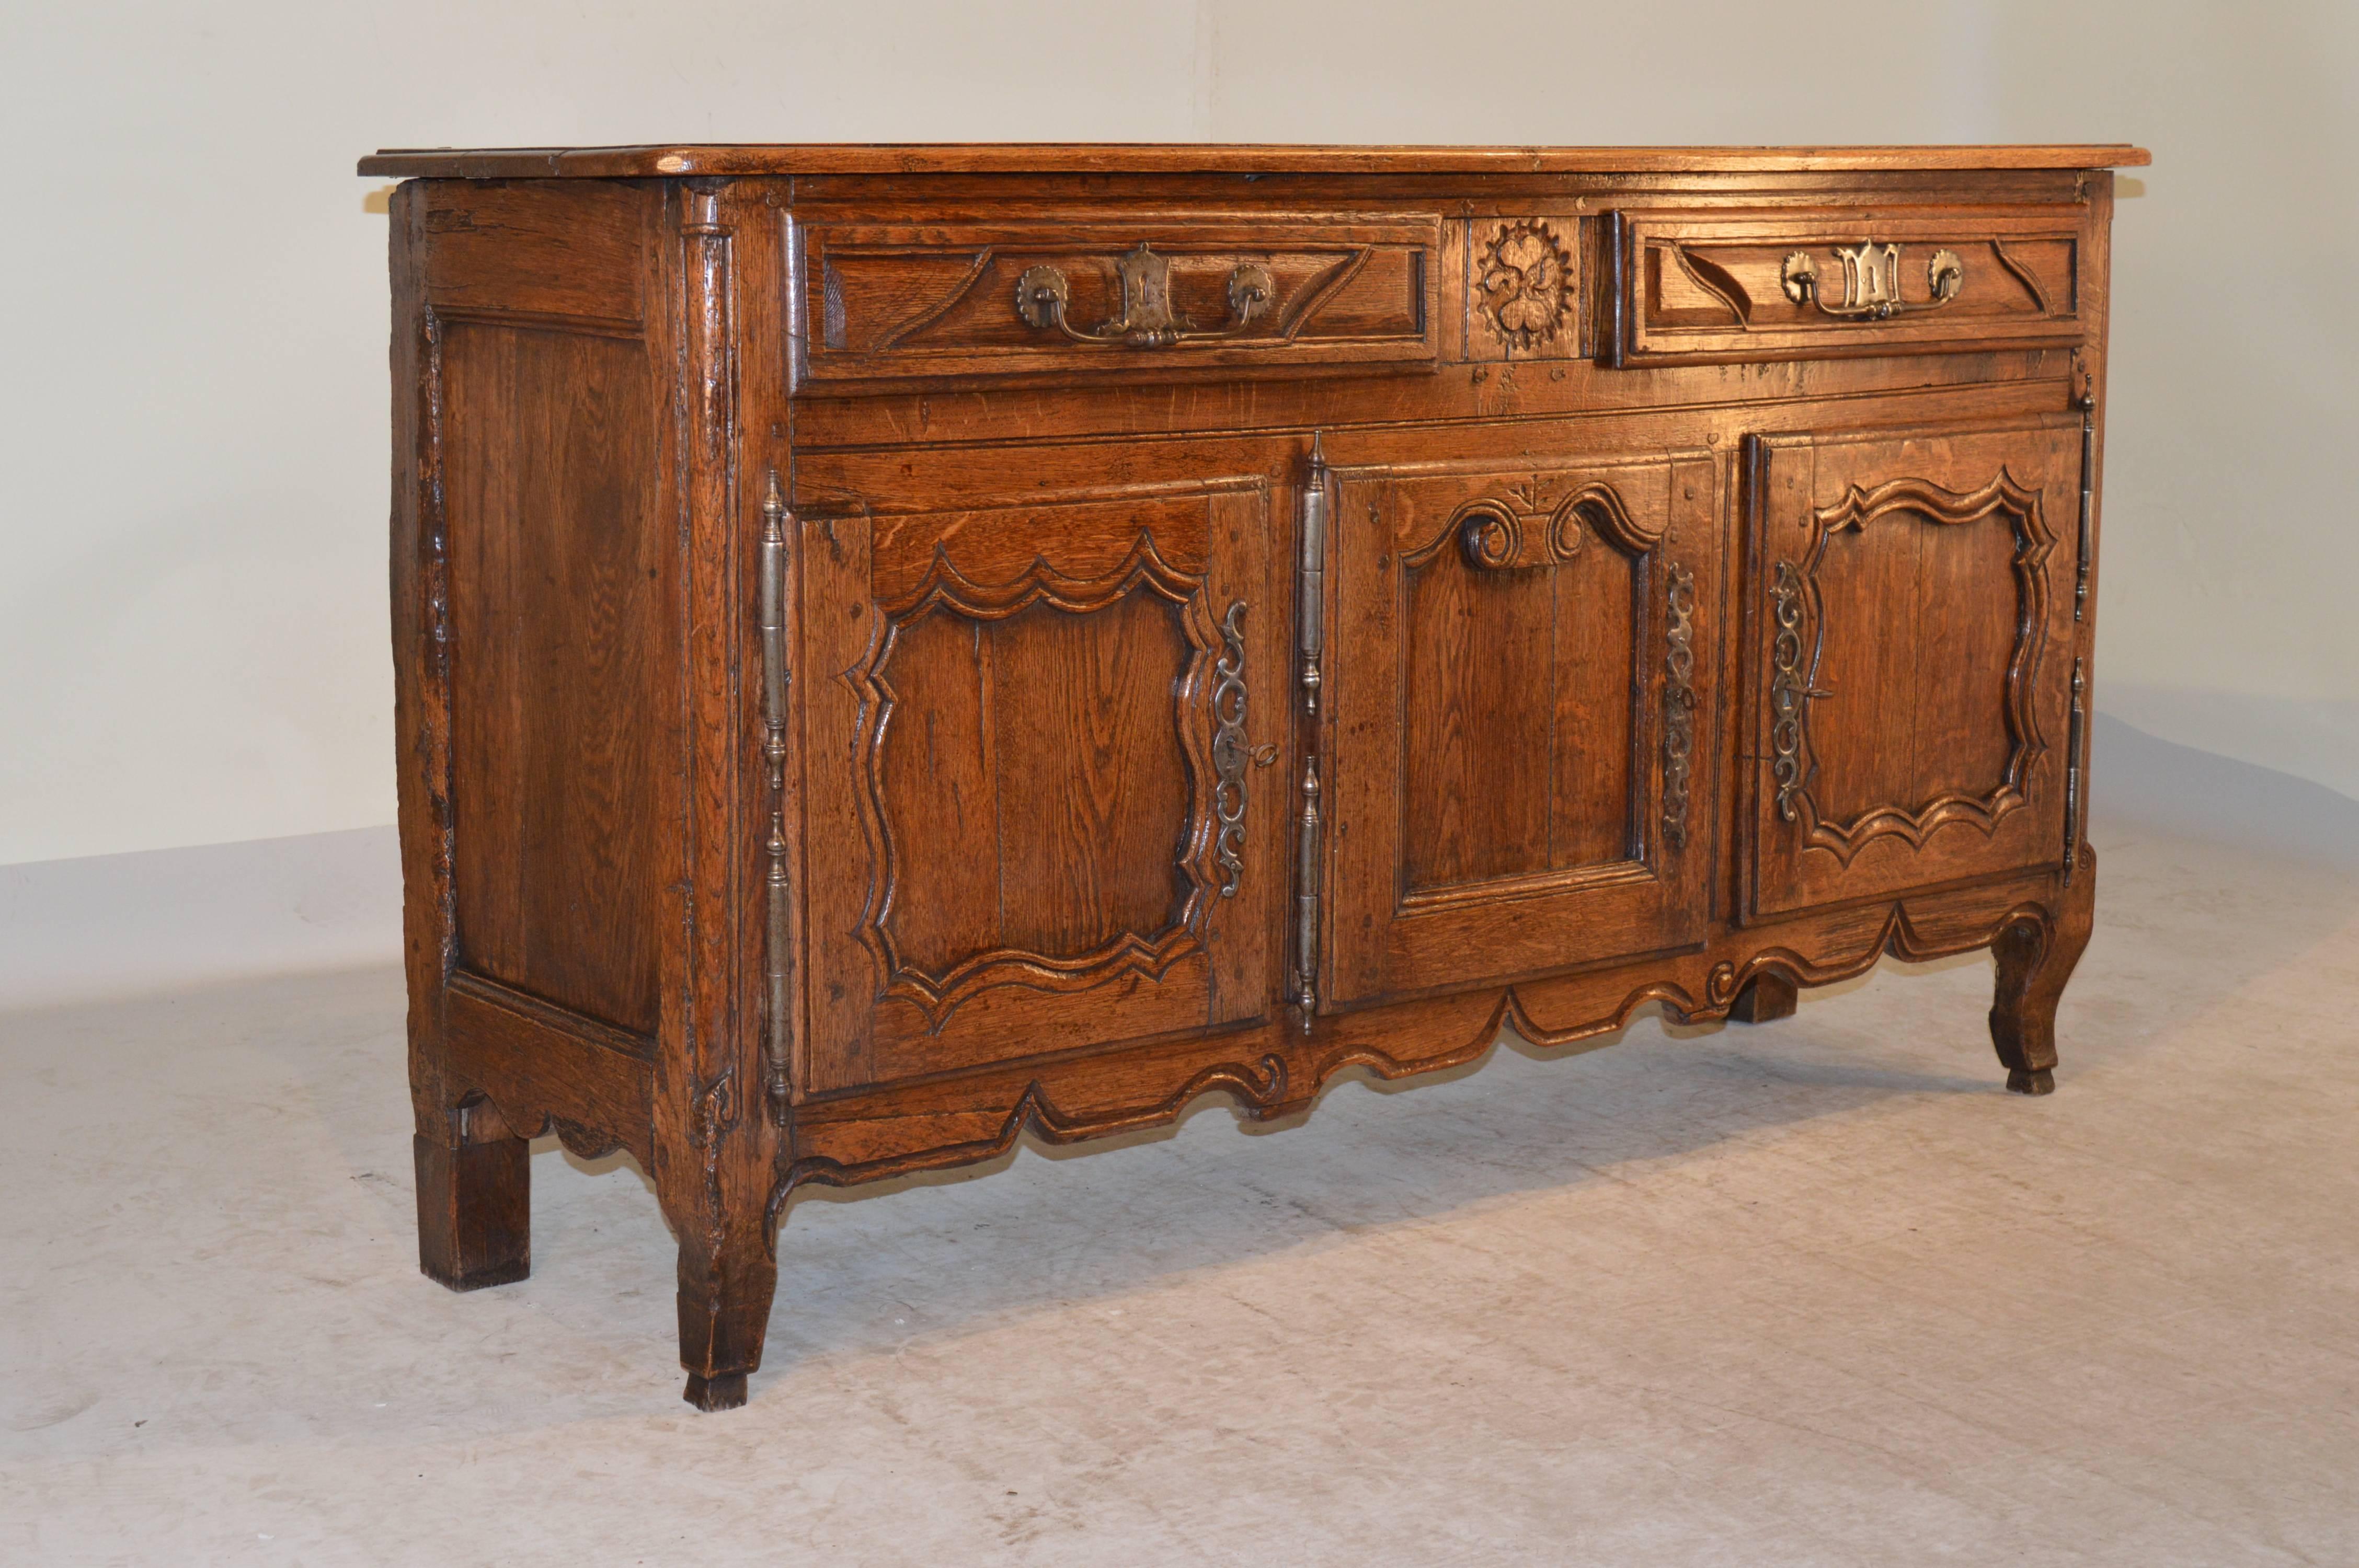 18th century French buffet made from oak with a three board top which is beveled around the edge. The case contains two drawers, over three doors, which are all hand raised panelled and are decorated with beautifully hand forged hardware. The doors